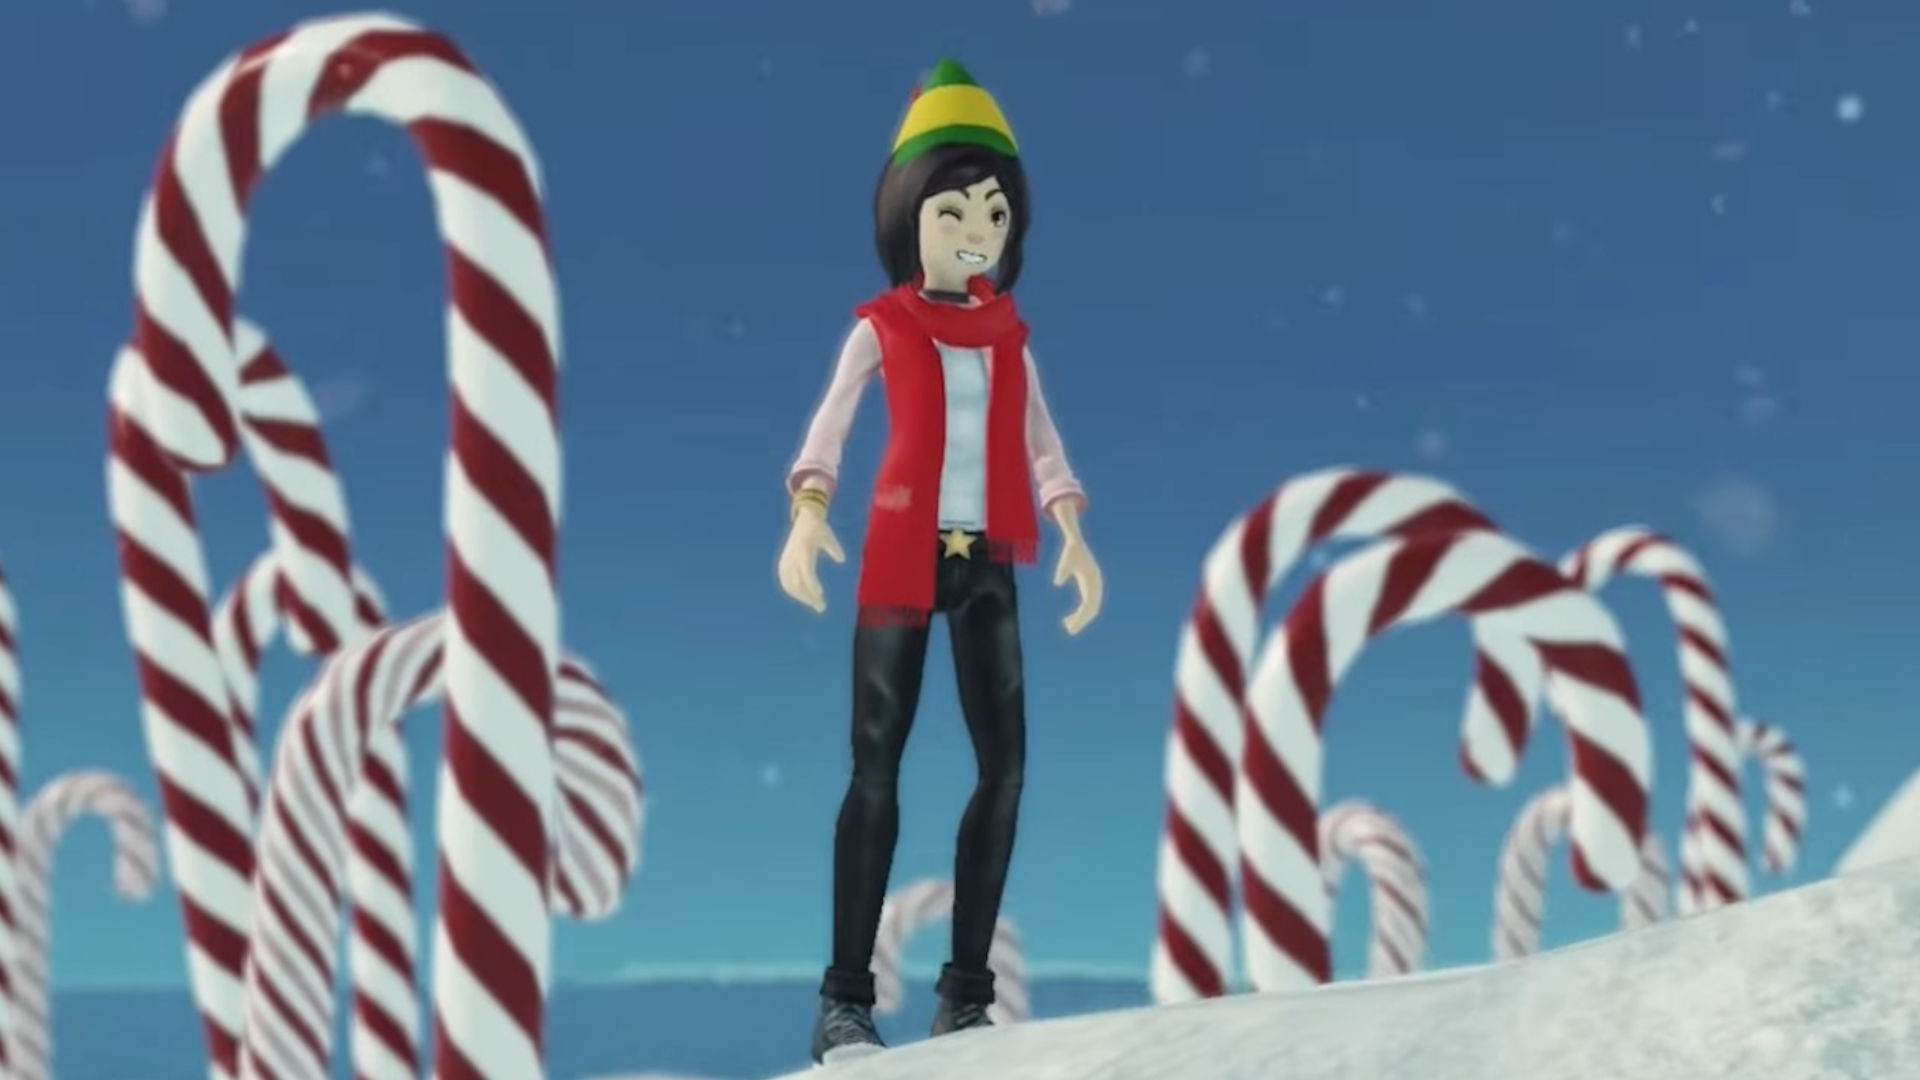 Get some holiday spirit with the Roblox Elf North Pole Workshop game